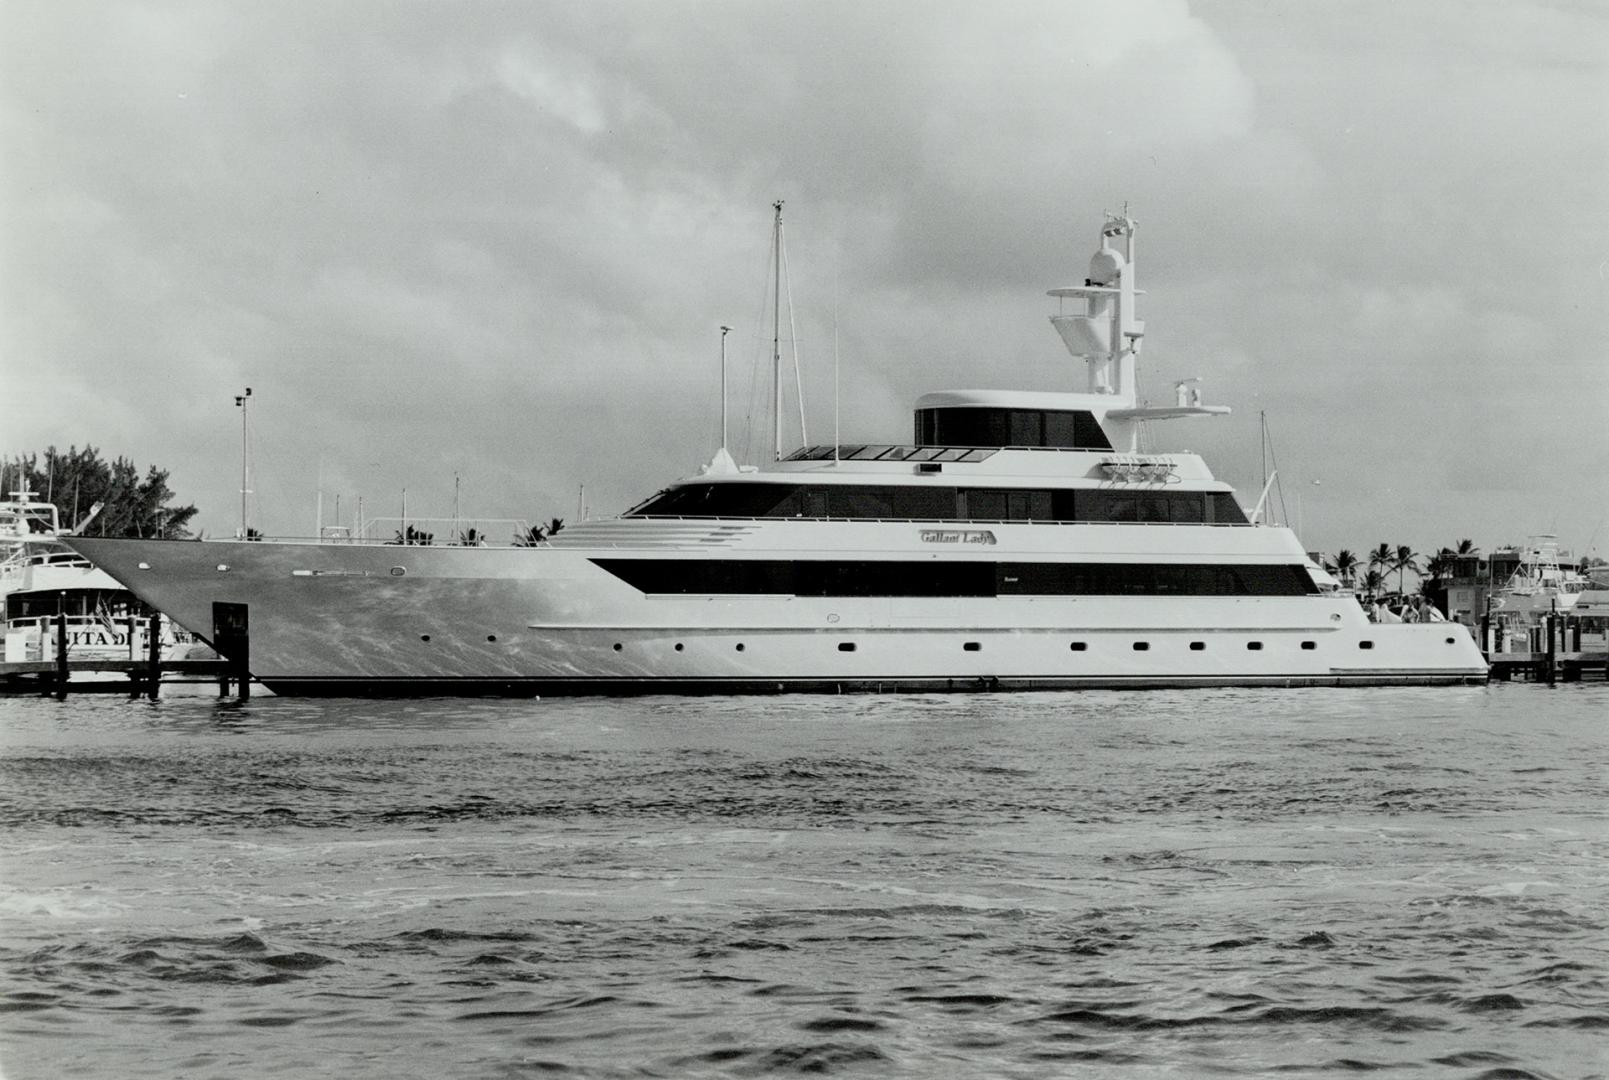 Gallant Lady, an $18-million yacht owned by Fort Lauderdale auto dealer